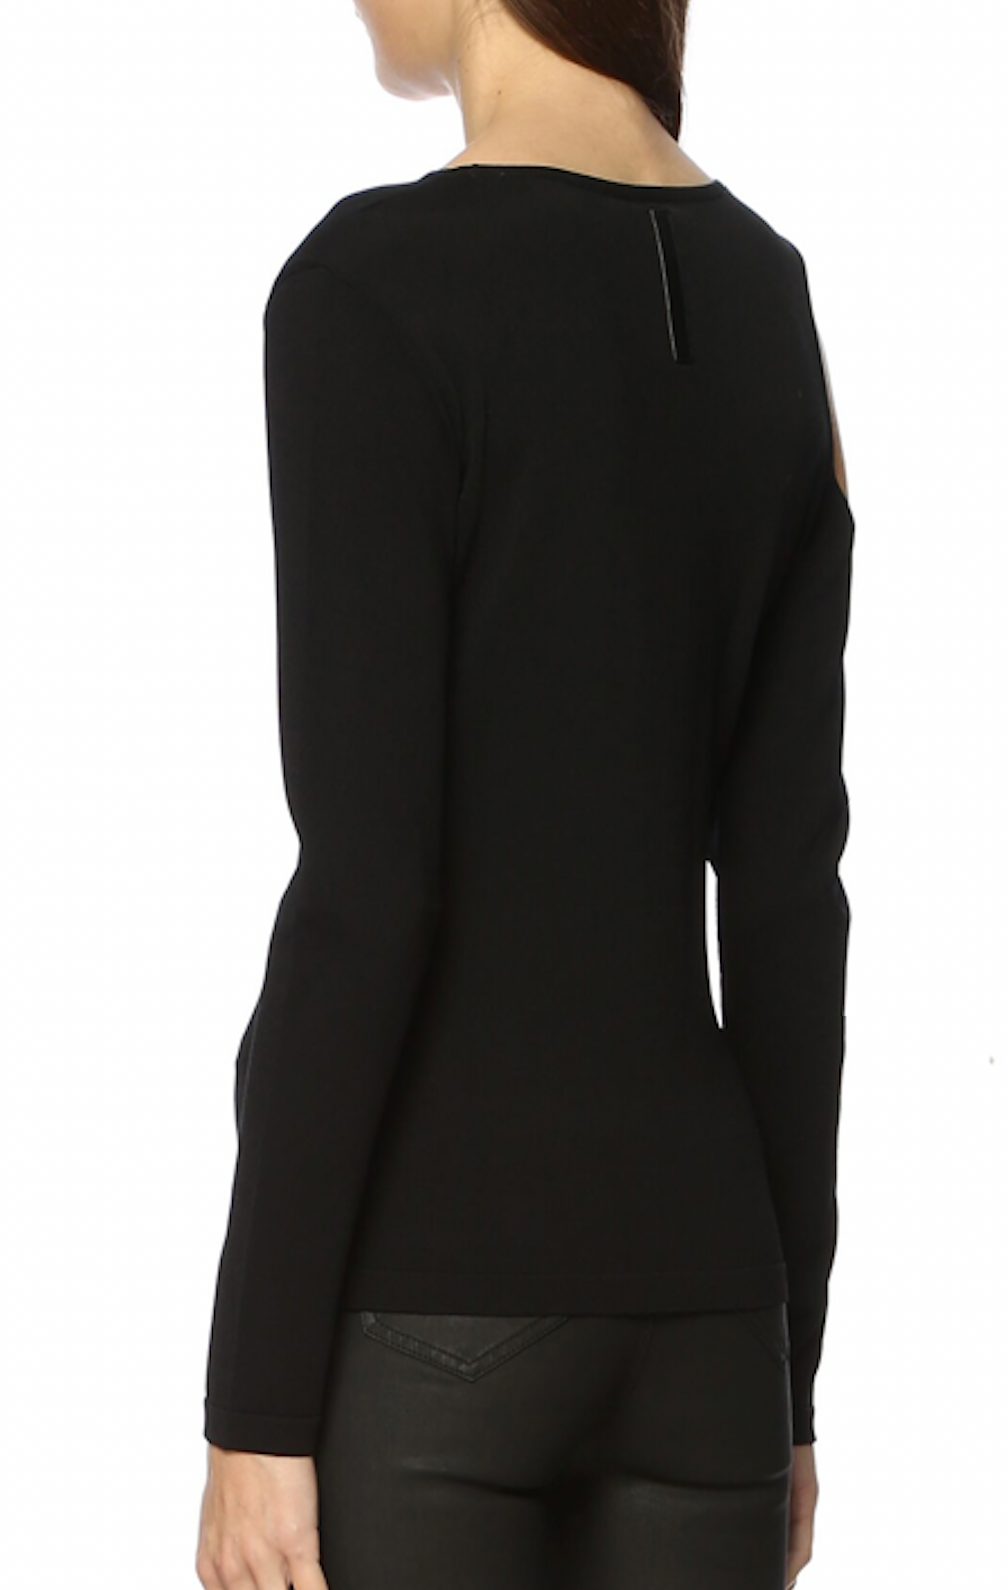 Isla Slim Fit Black and White Top with Shoulder Detail